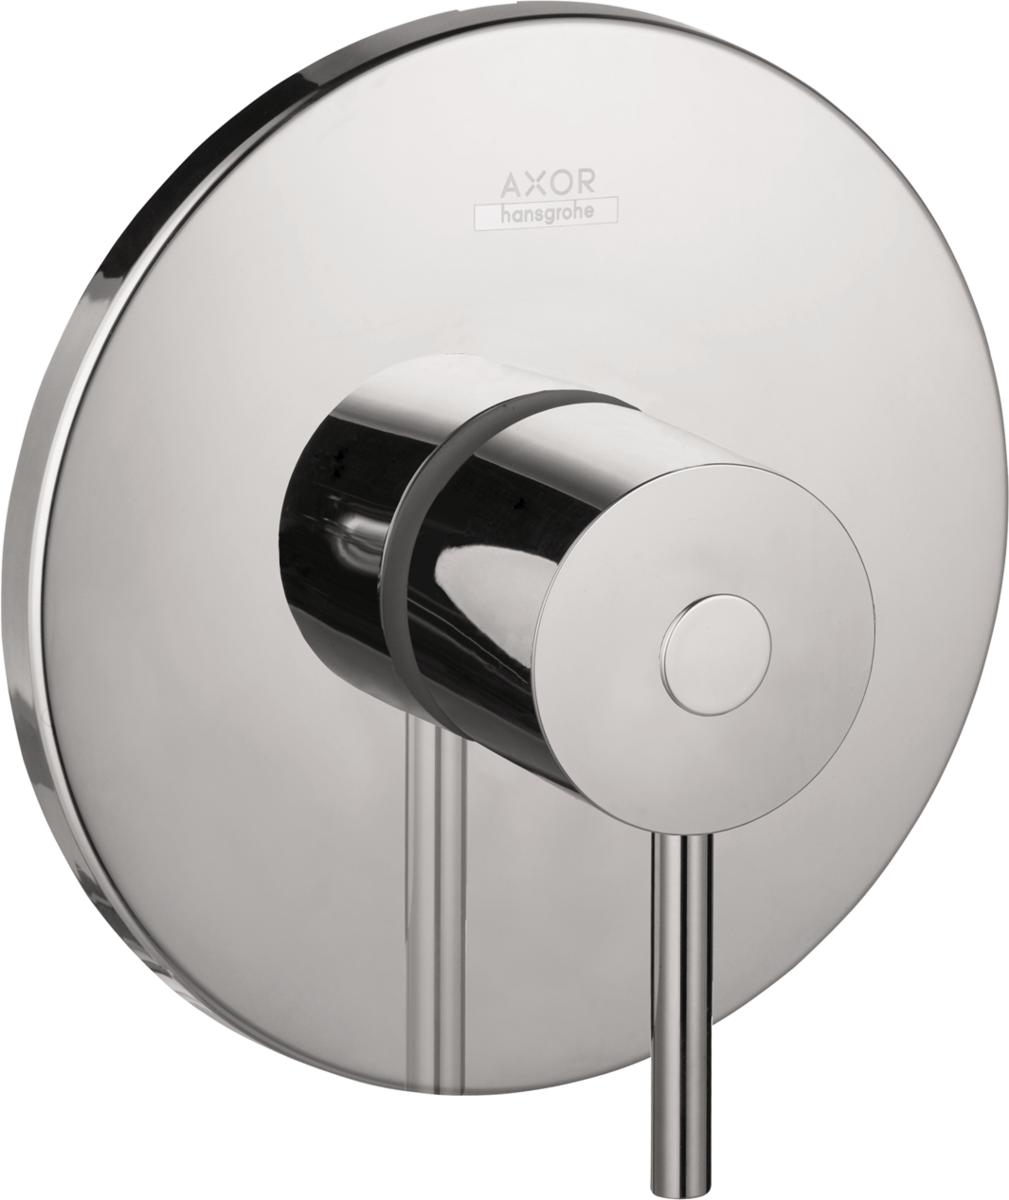 annuleren stil Haast je AXOR Uno Shower faucets: chrome, Art. no. 38418001 | Hansgrohe Pro US